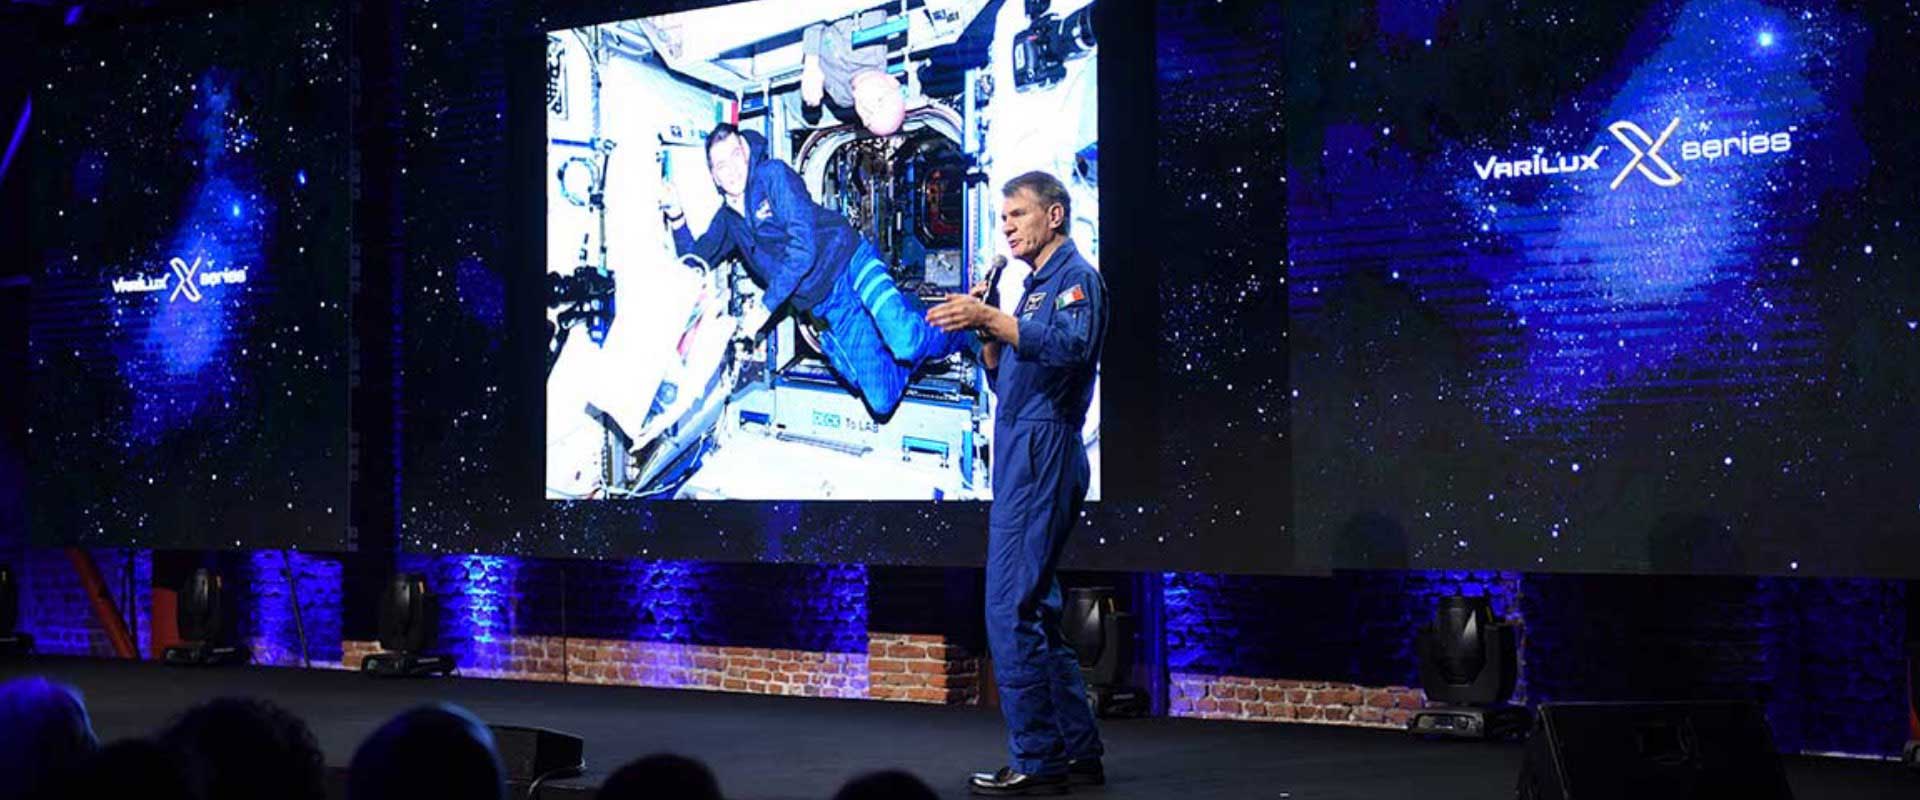 Paolo Nespoli speaker at Essilor special event